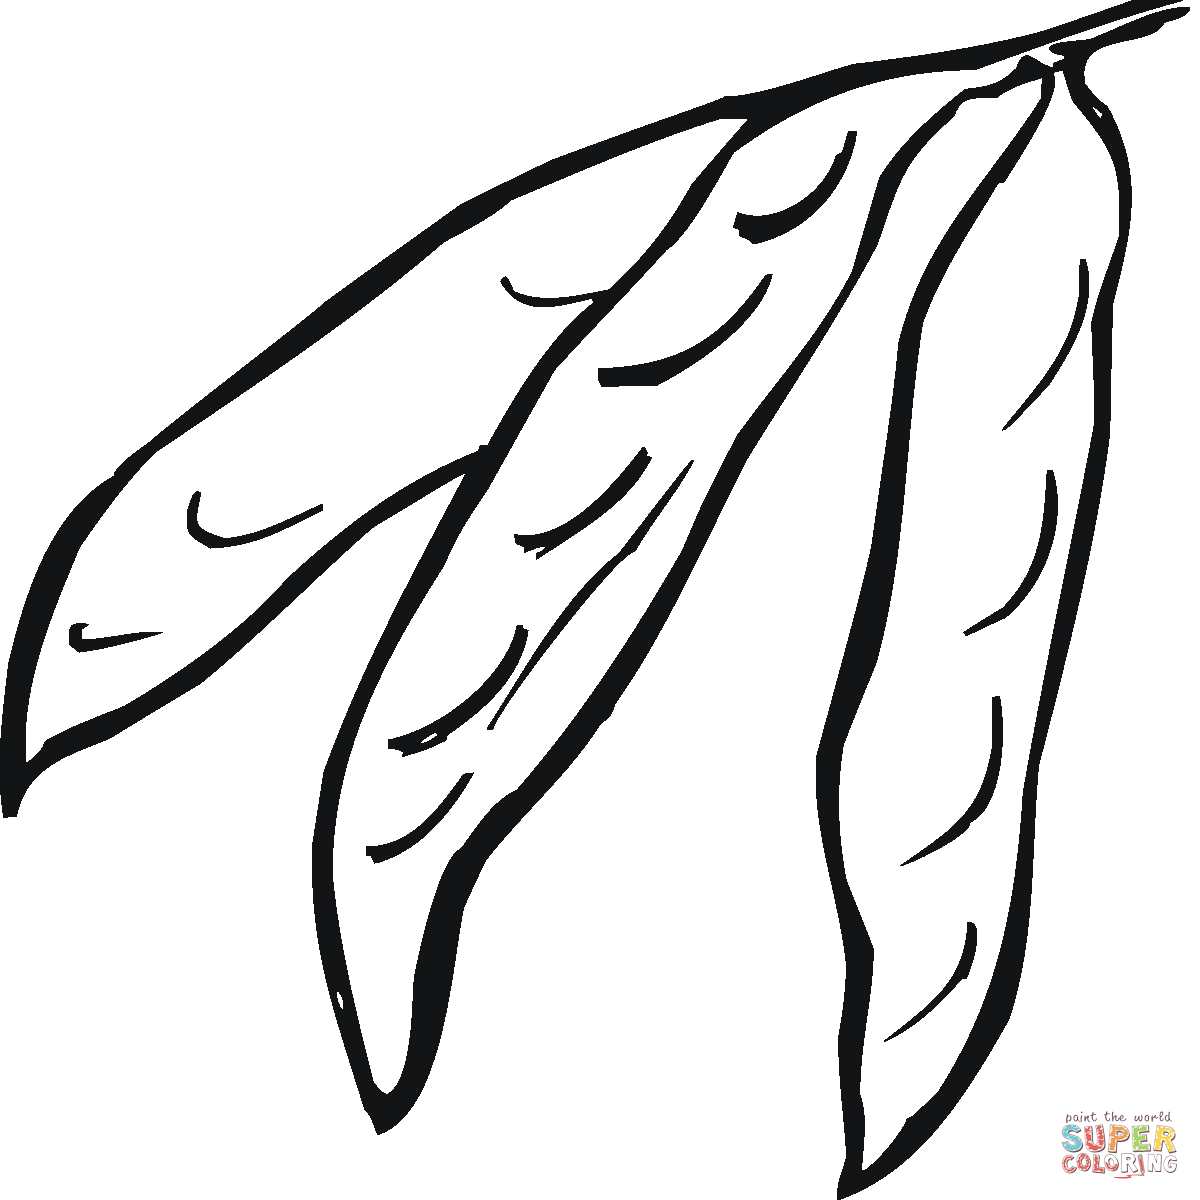 Green Beans Coloring Page Green Bean Coloring Pages Easy Deliyazar Coloring Home